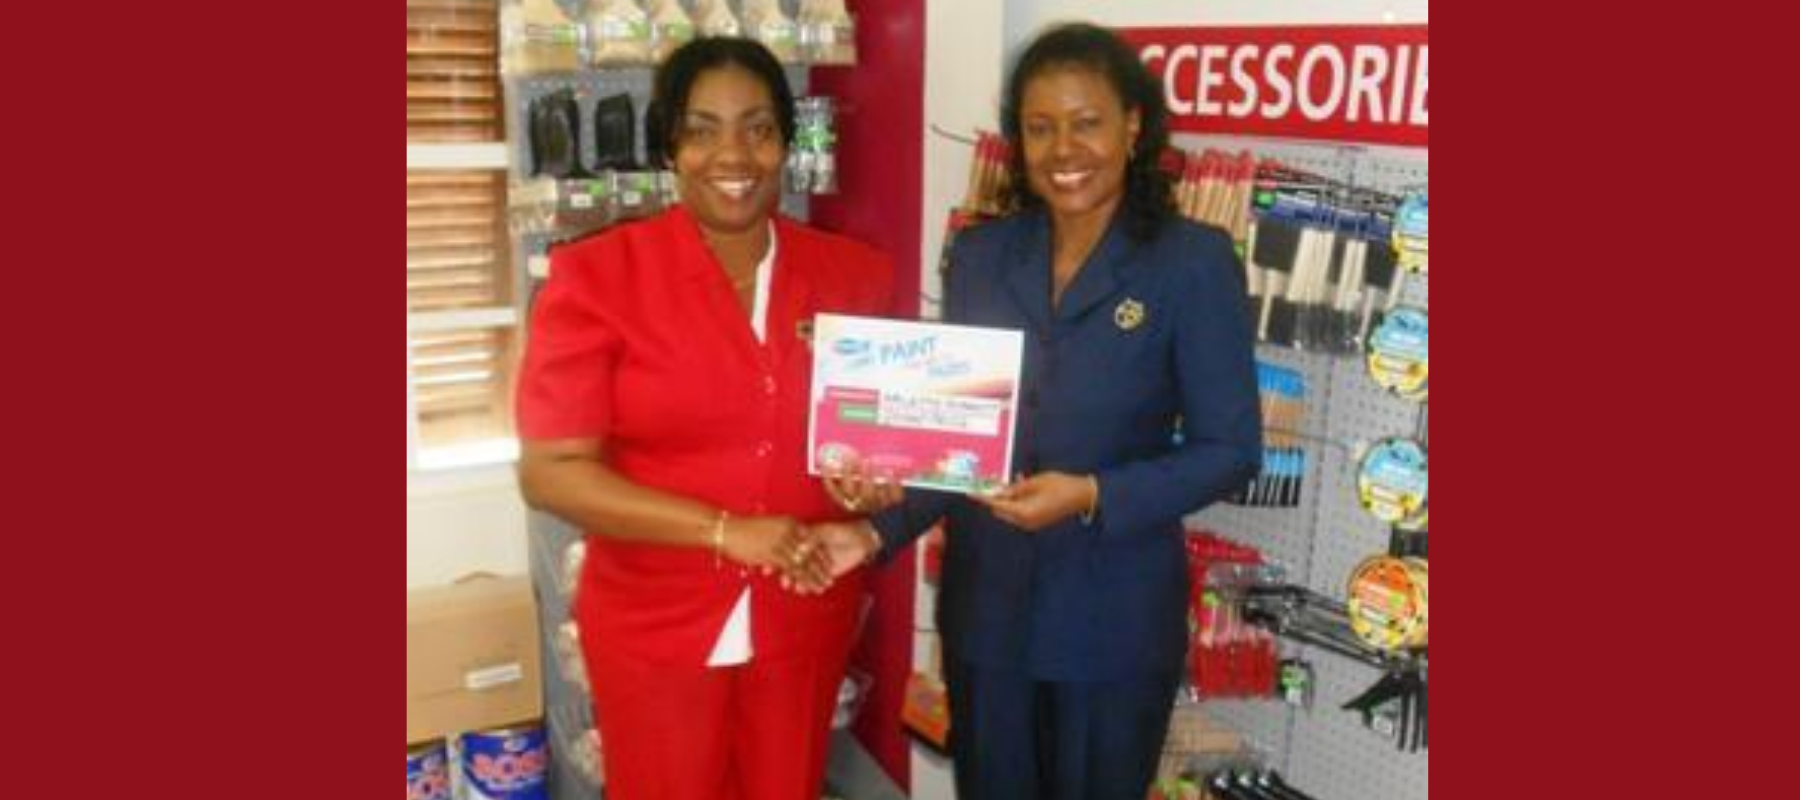 Arlette Sisnett (r), grand prize winner of a Luxurious Cruise for 2 valued at US $5000 accepts her prize from Harris' Susan Gill" width="336" height="448" /></a> Arlette Sisnett (r), grand prize winner of a Luxurious Cruise for 2 valued at US $5000 accept